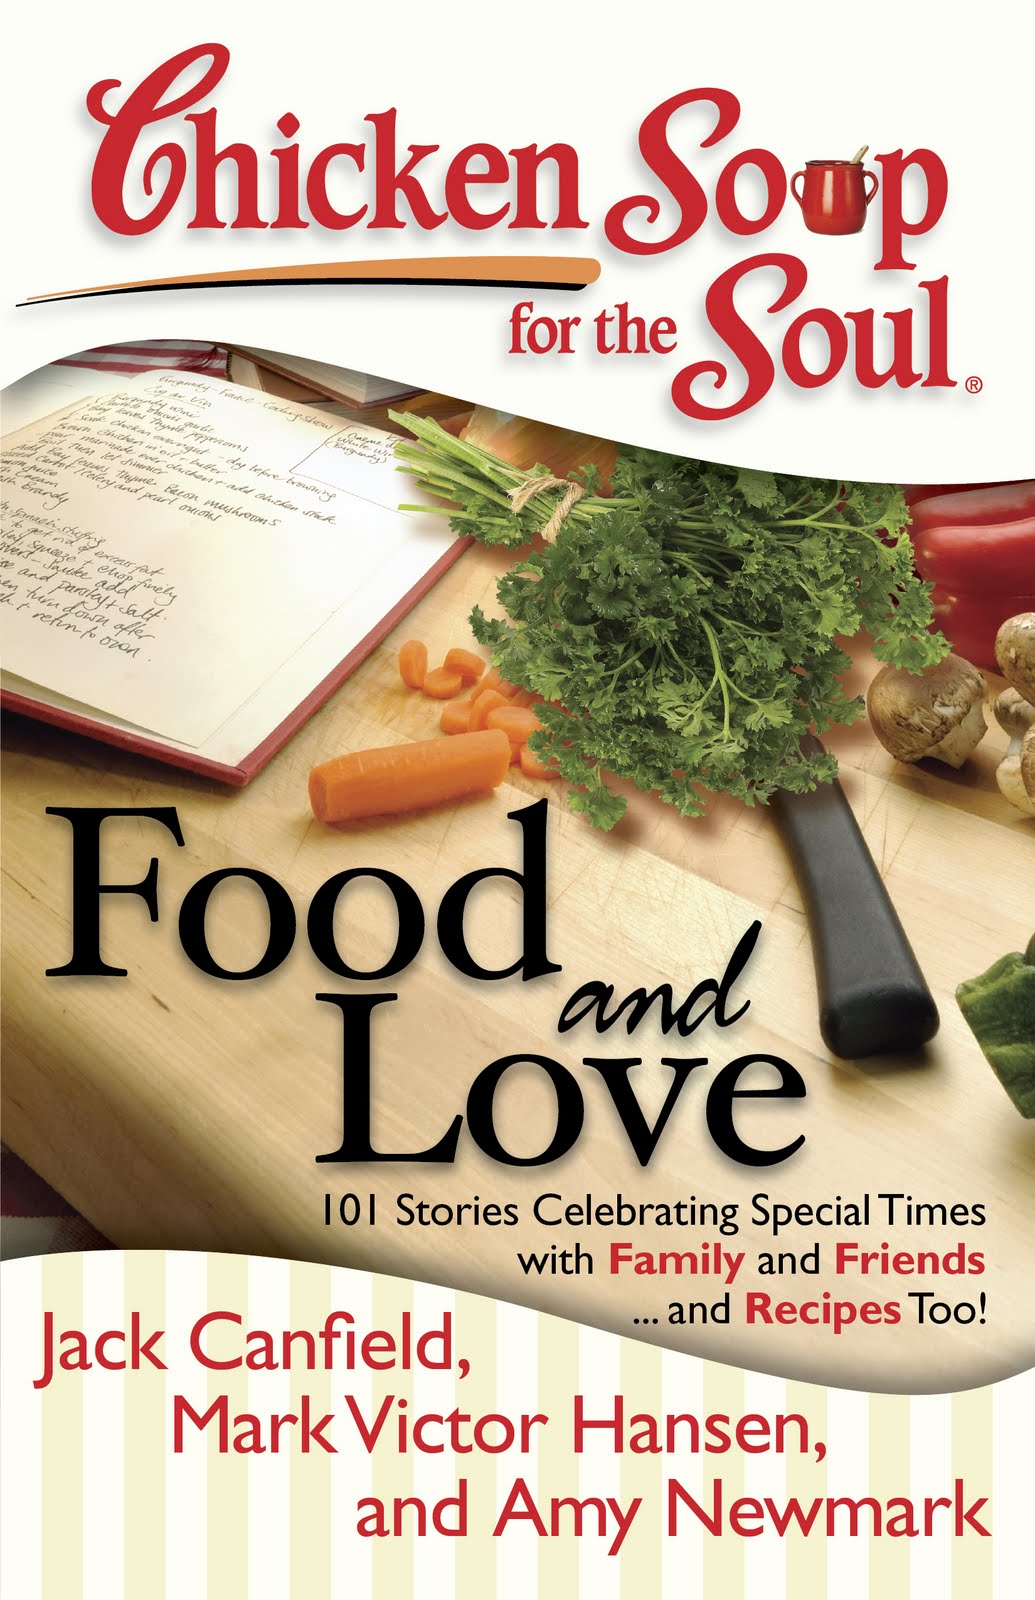 Chicken Soup for the Soul  Food and Love Review and Giveaway! Ends 4/2